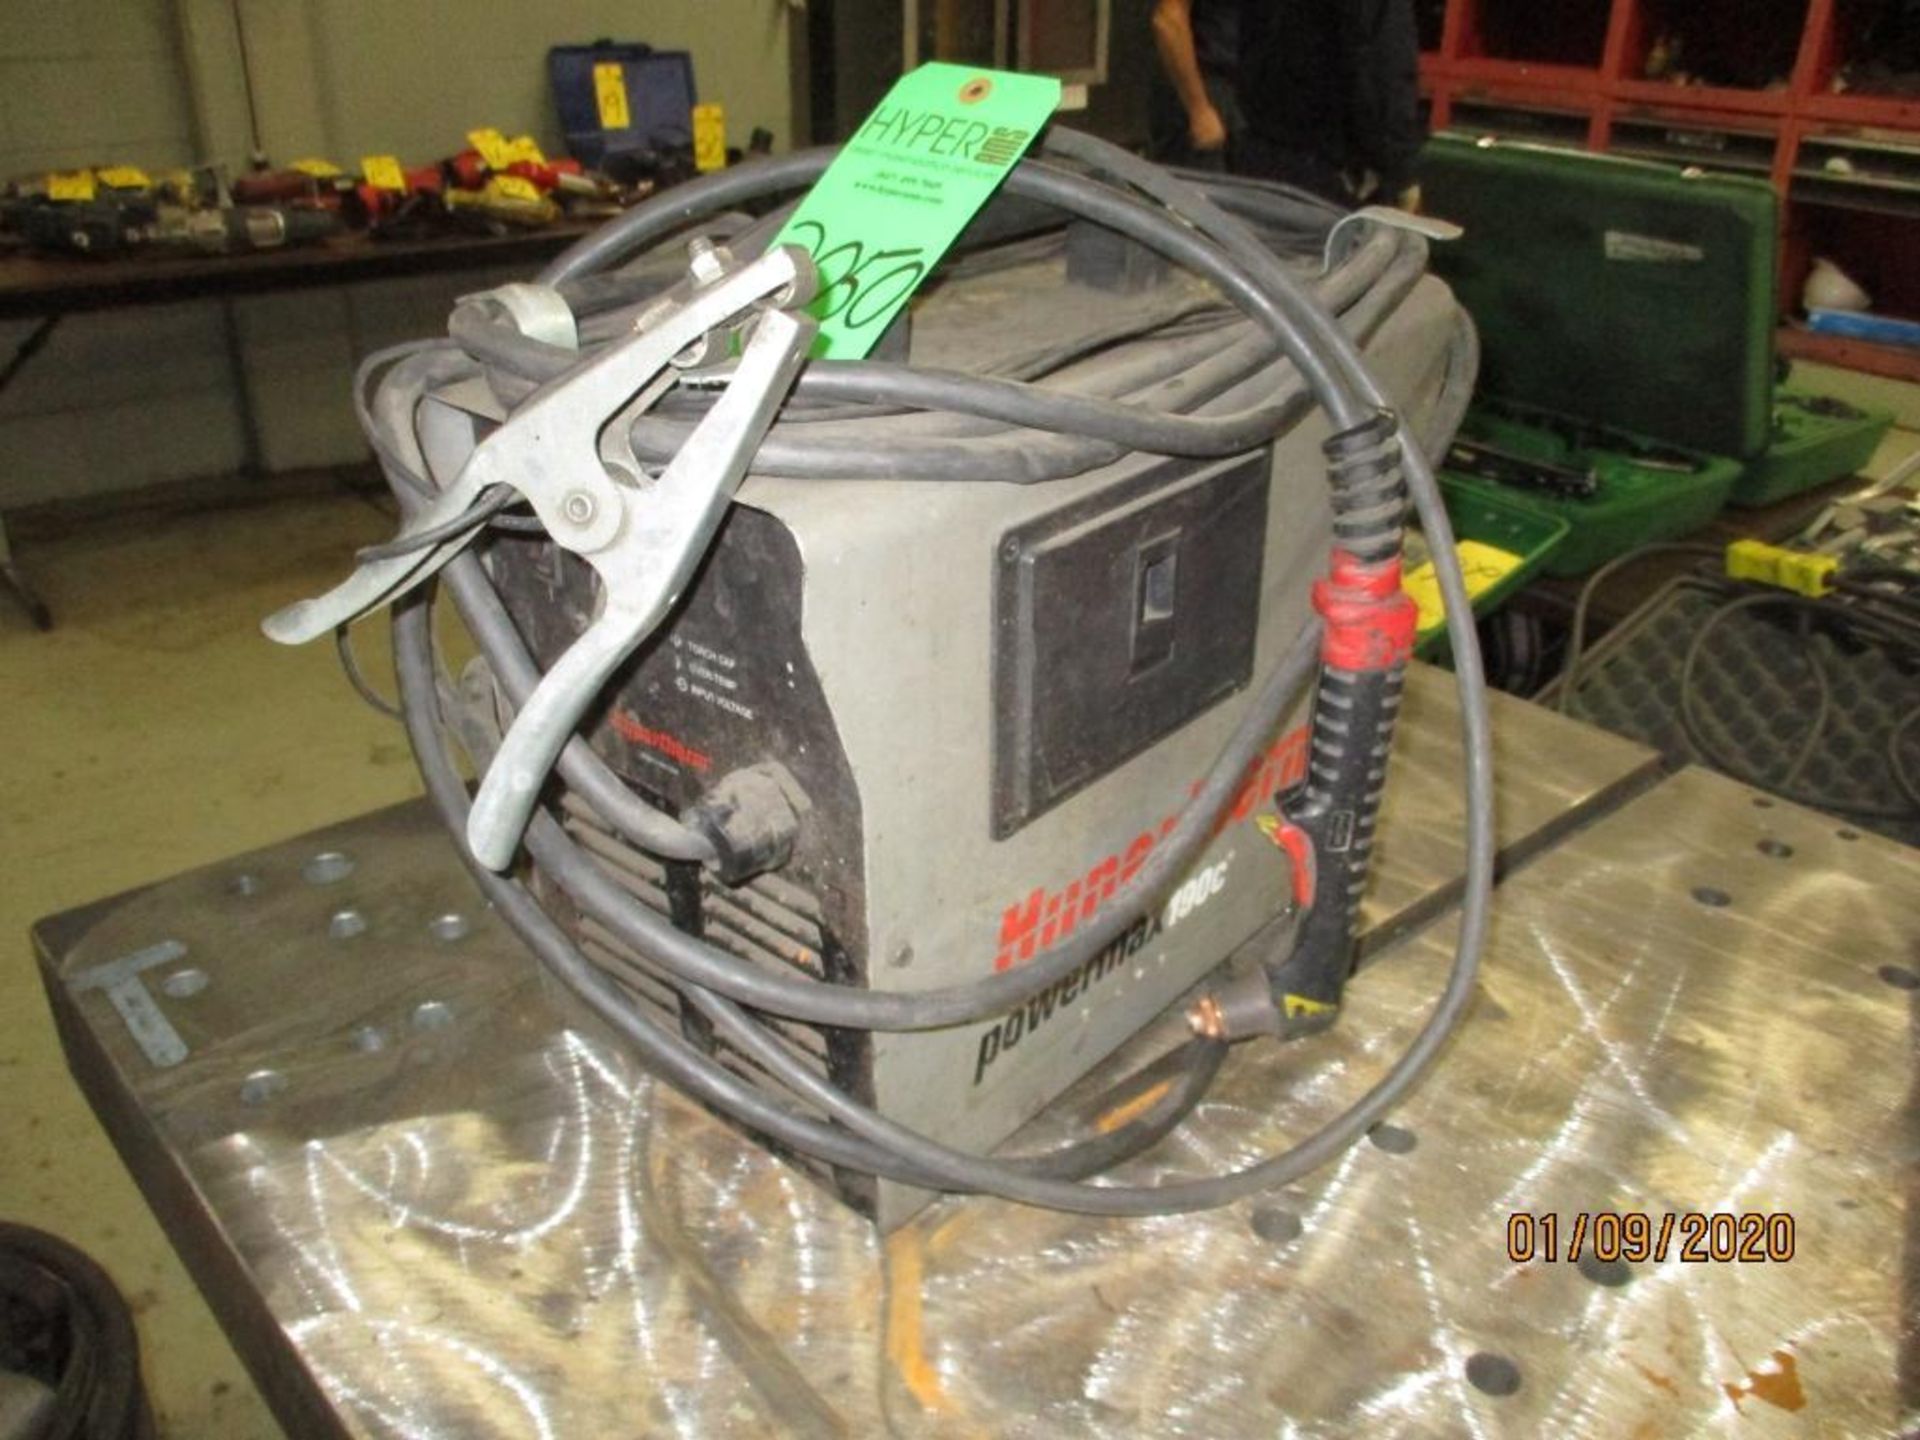 Powermax 350 And 190C Hypertherm Plasma Cutters - Image 2 of 2